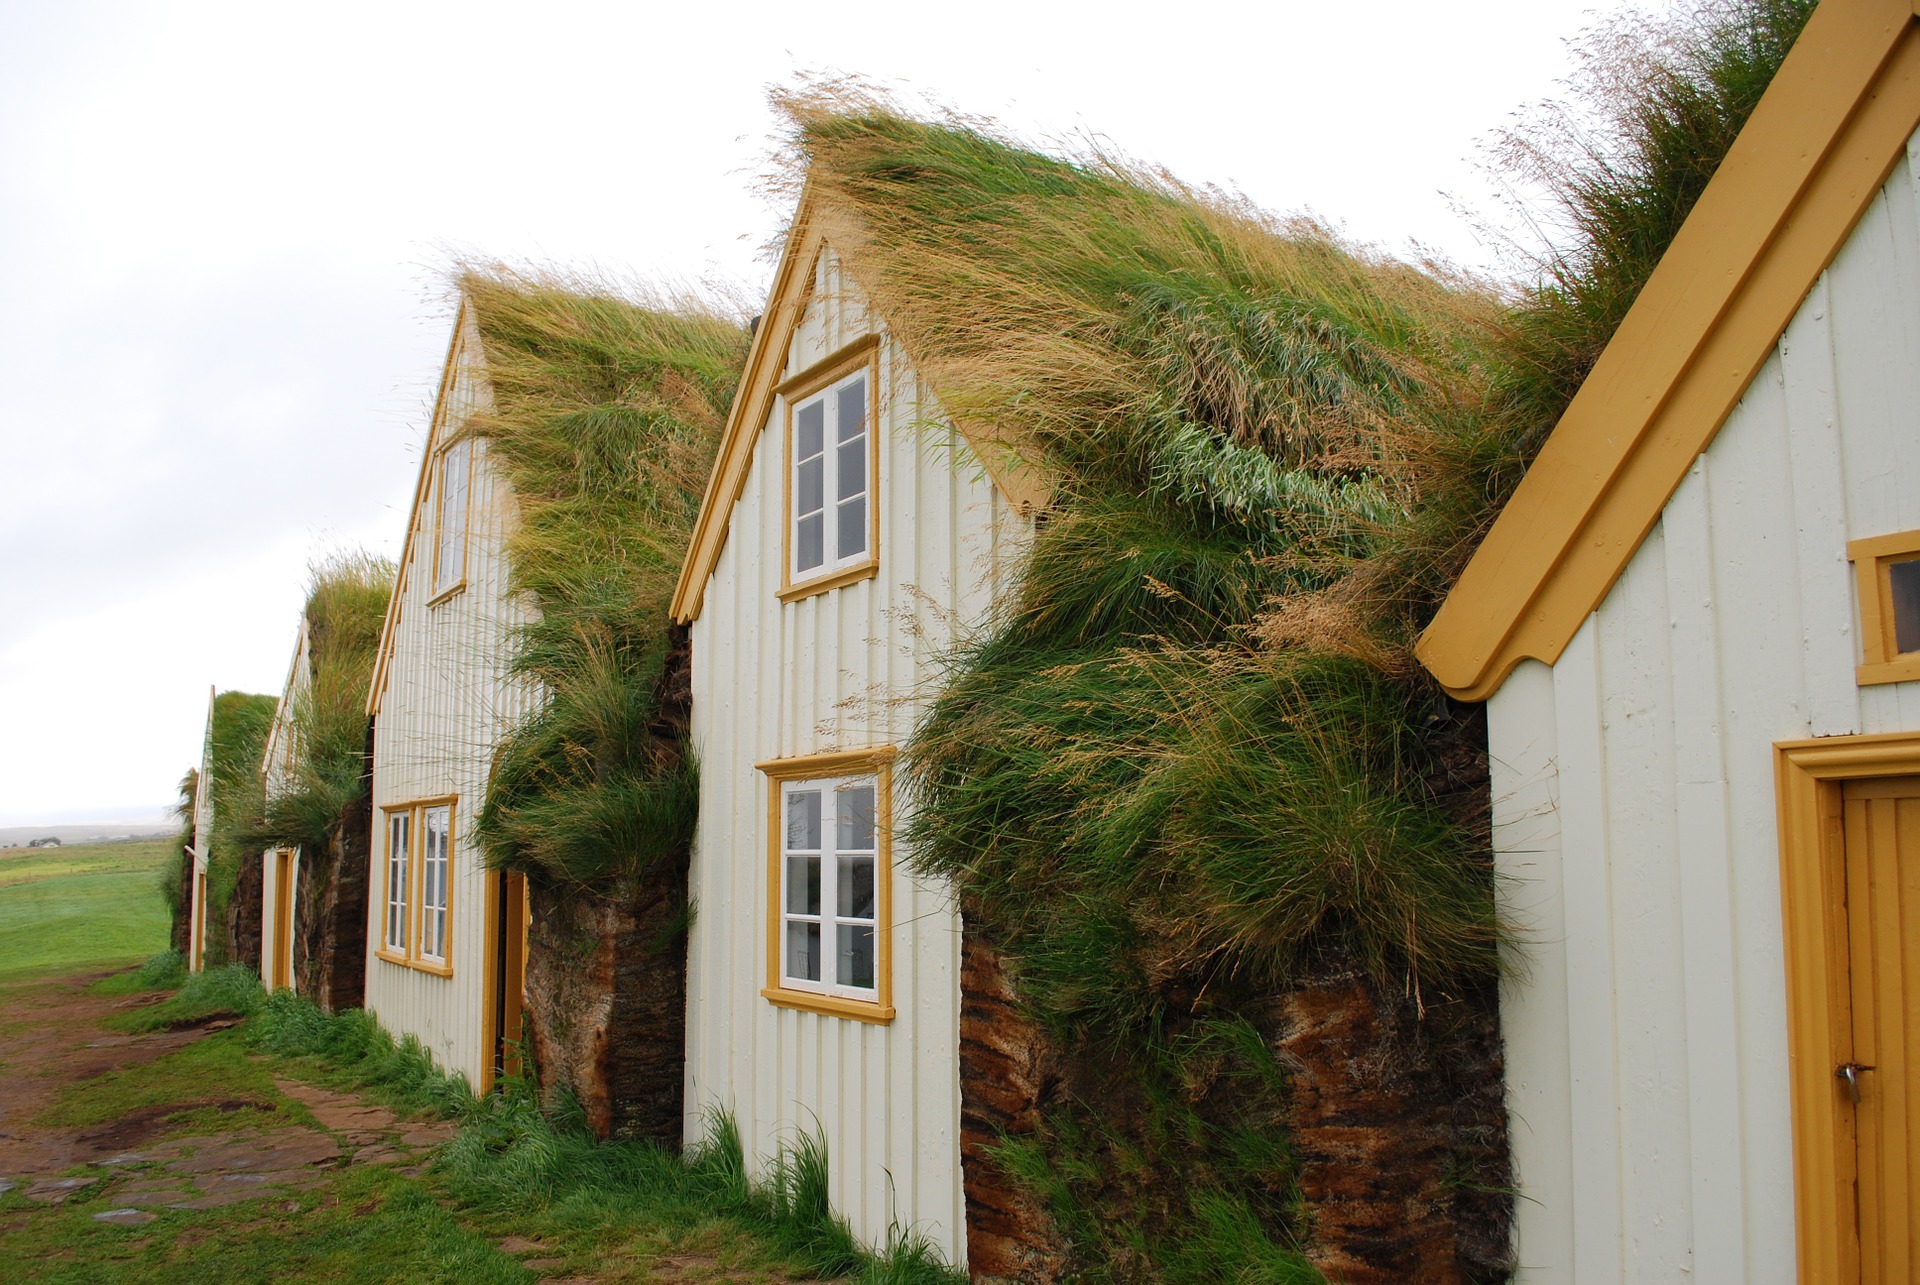 Burstabær style turf houses at the Glaumbær Museum in Iceland. Image source: www.pixabay.com